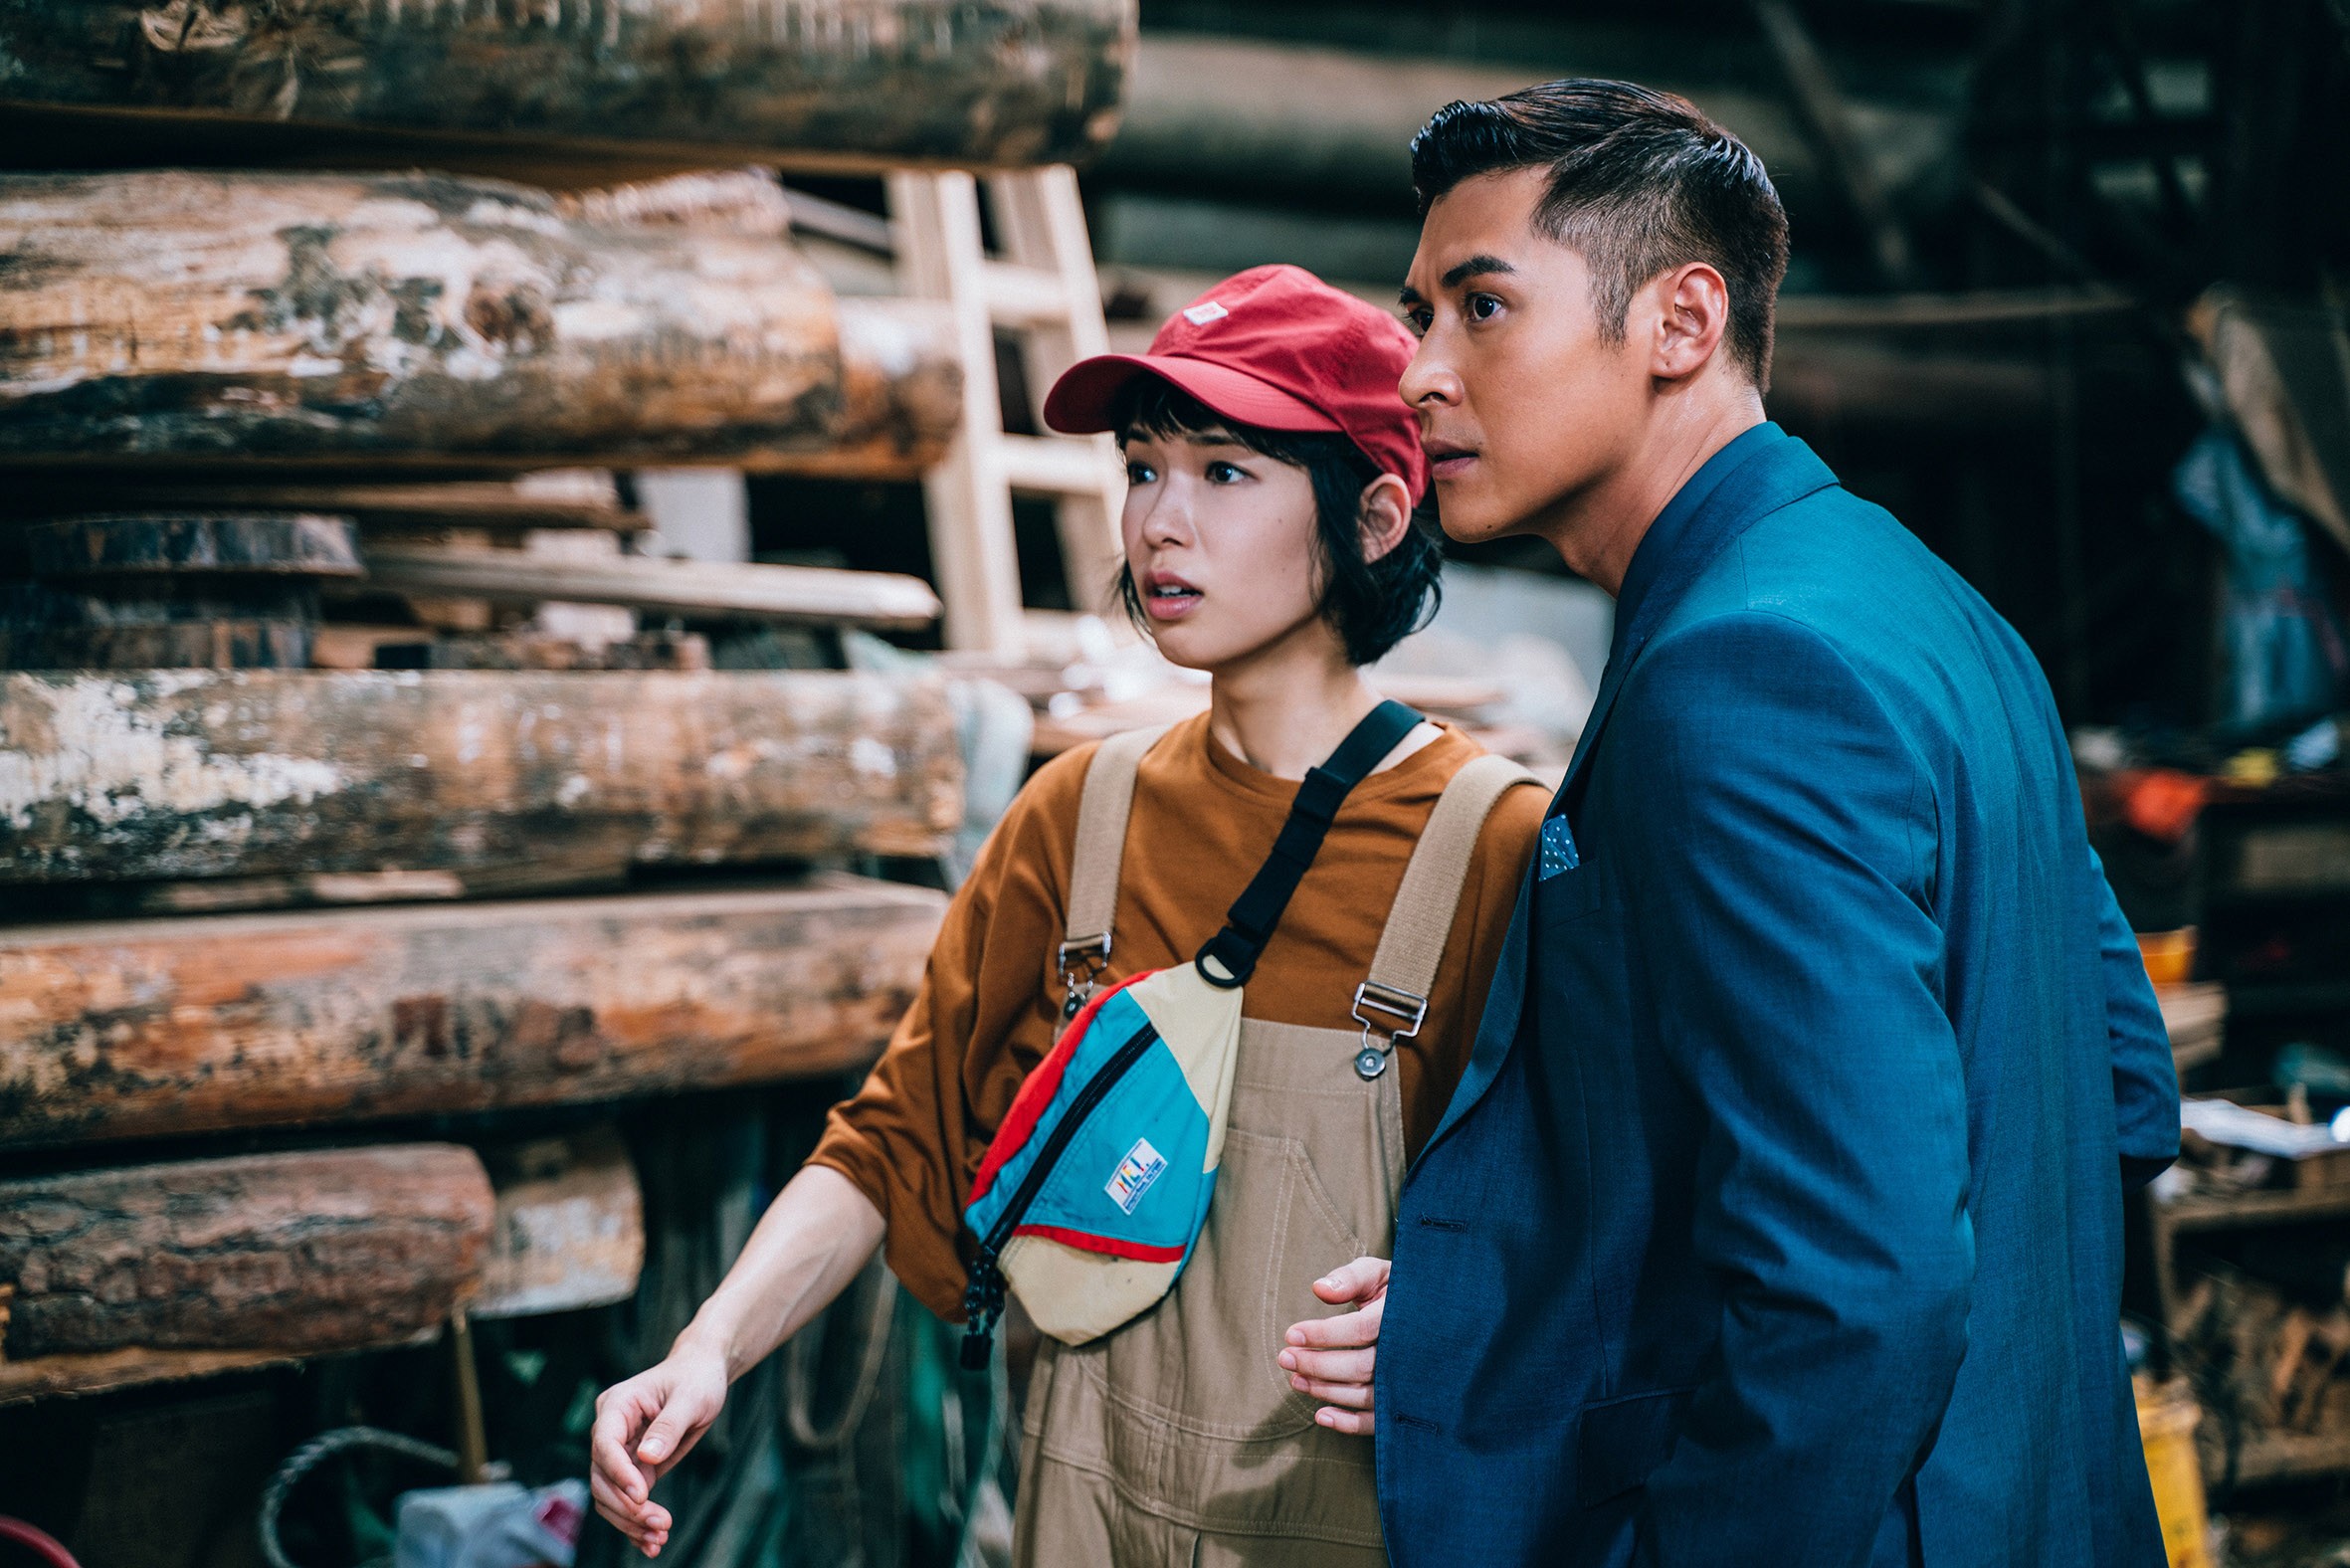 You Are the One film review: modern-day Cinderella story romantic comedy by  Patrick Kong stars Carlos Chan, Gladys Li | South China Morning Post